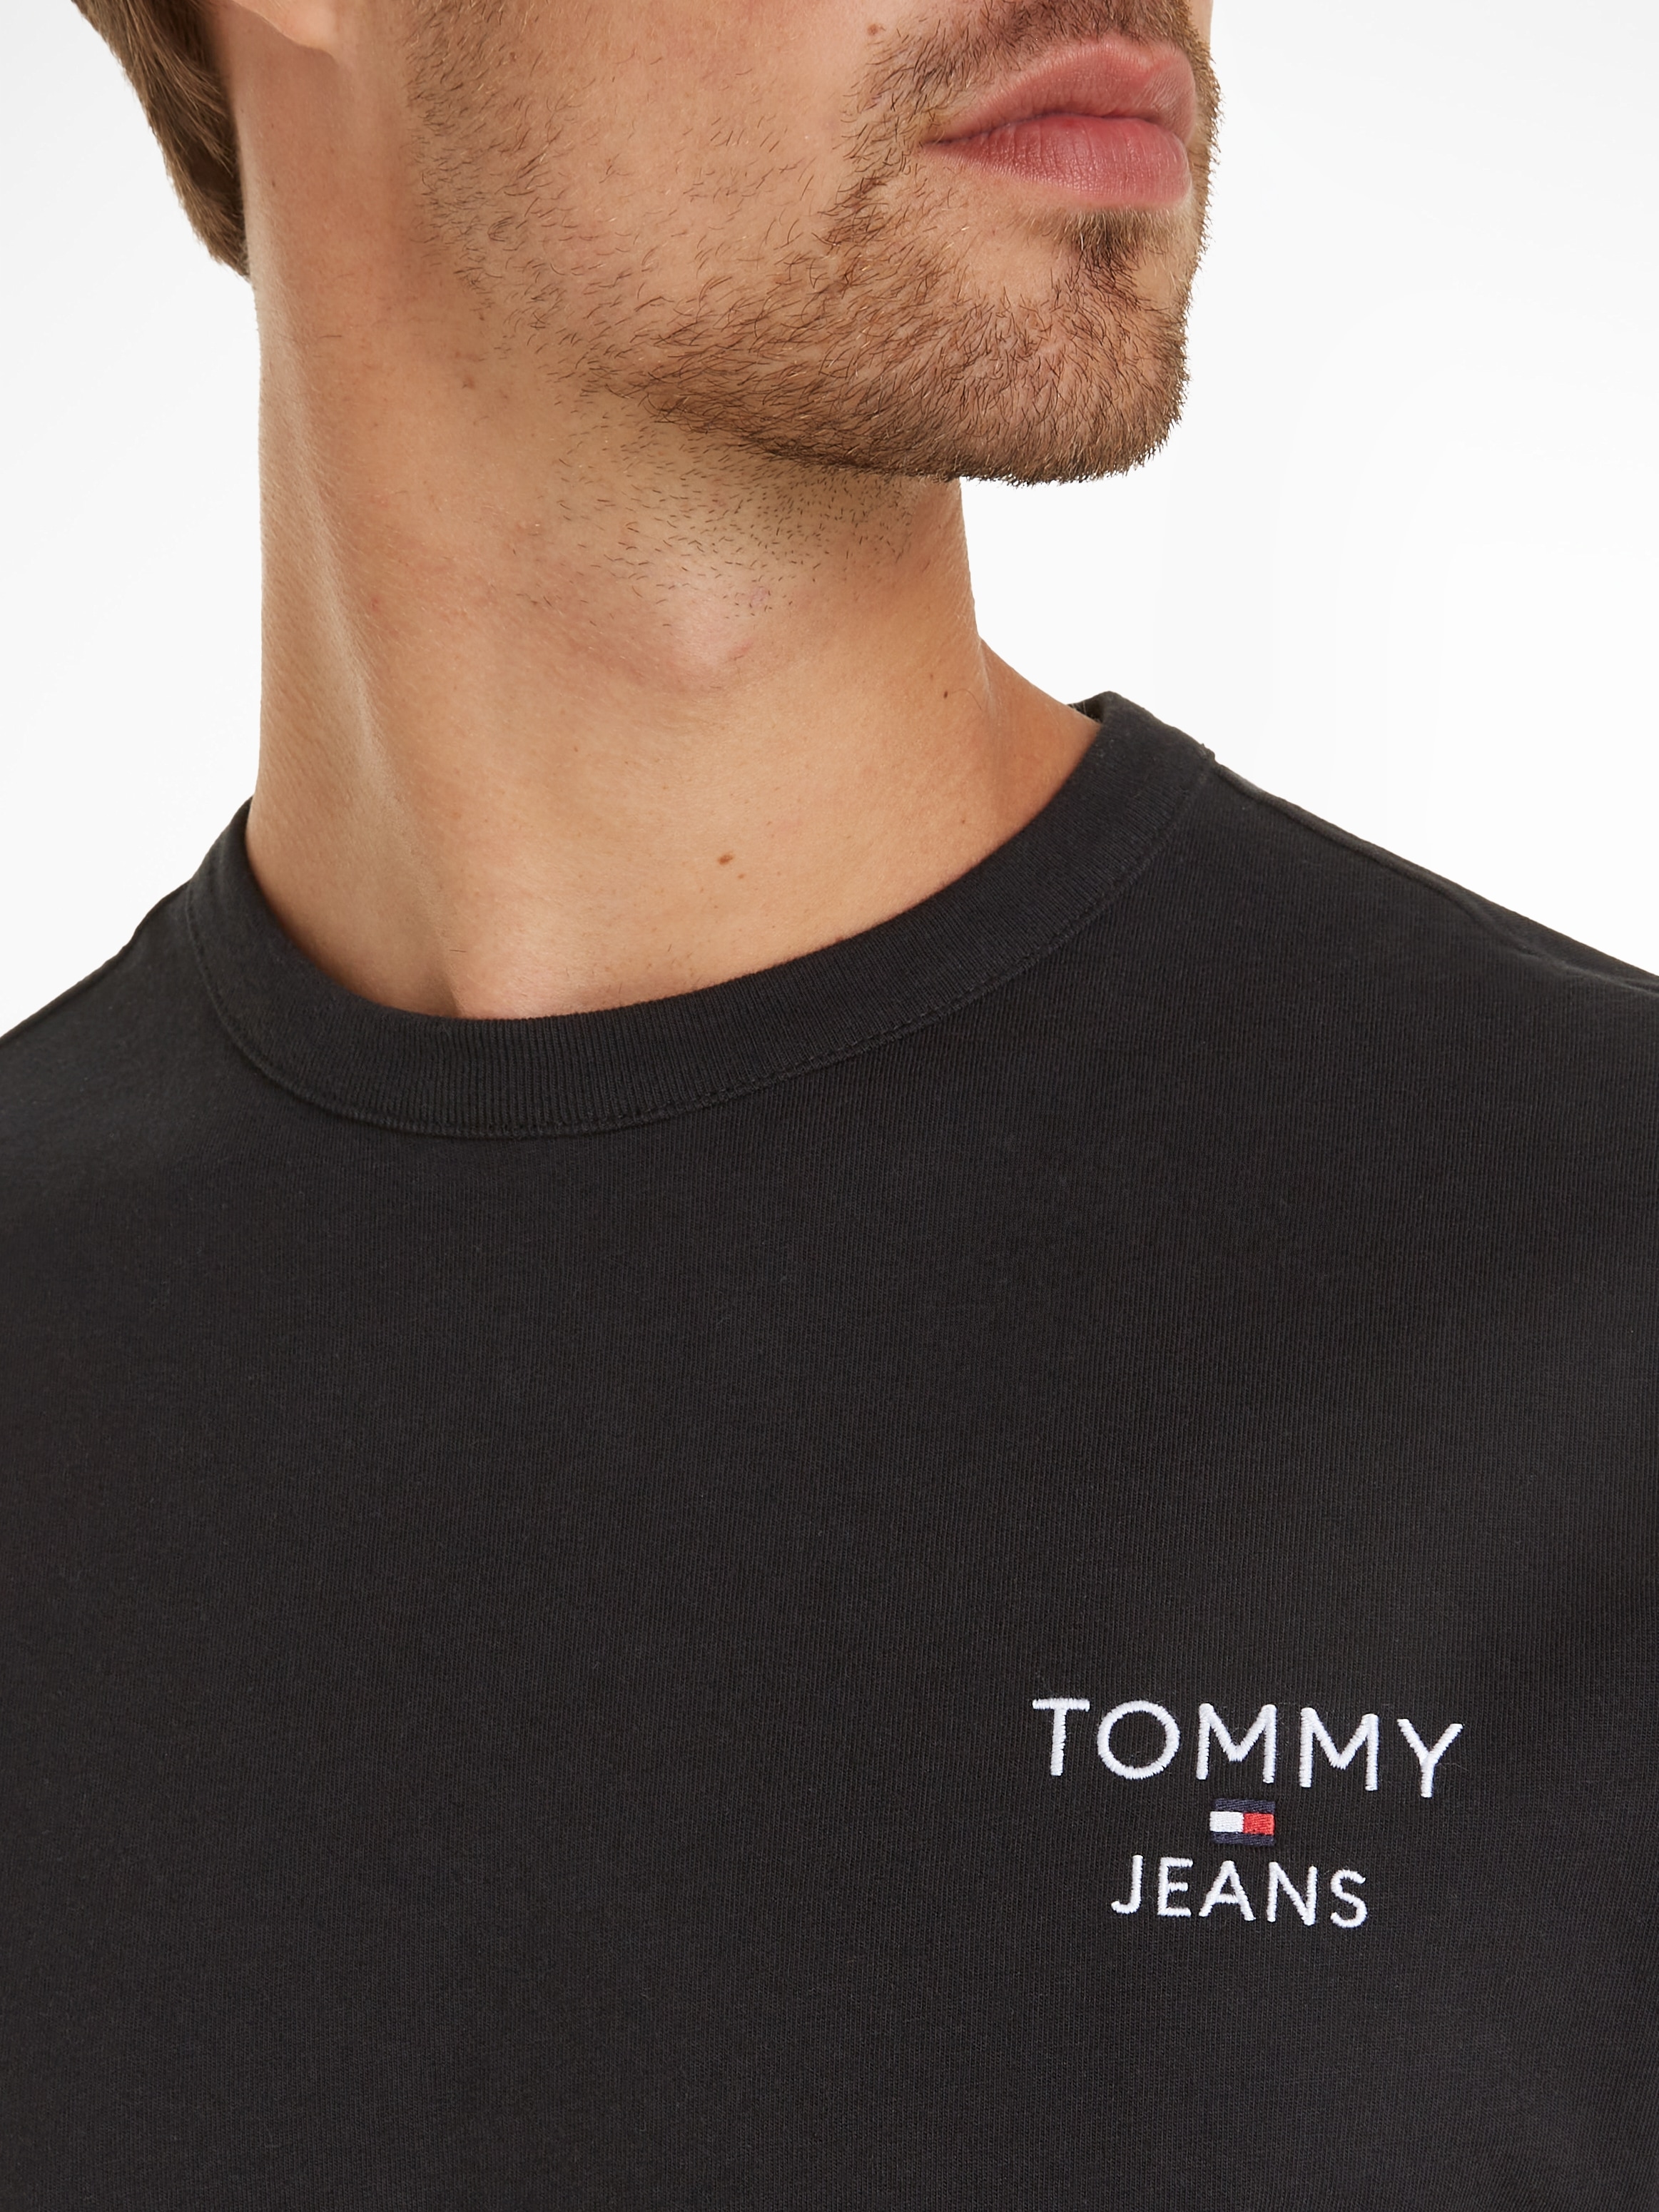 Tommy Jeans T-Shirt »TJM REG CORP TEE EXT«, mit Tommy Jeans Stickerei  online bei